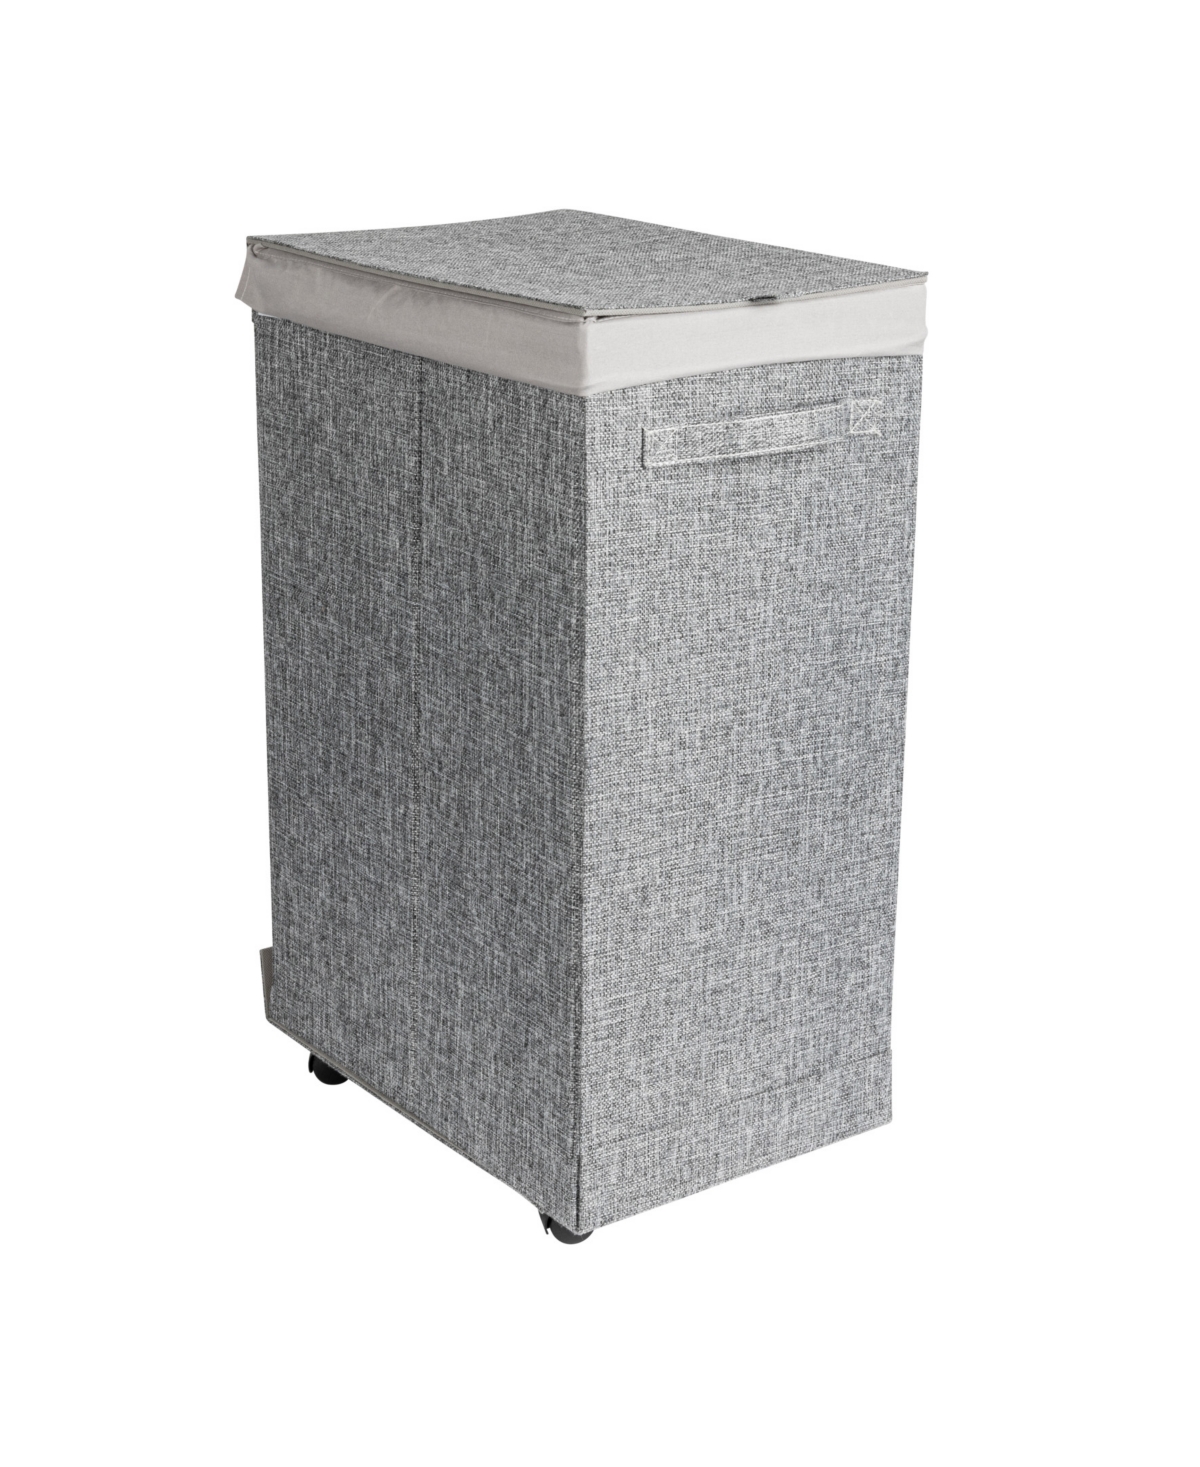 Narrow Collapsible Laundry Hamper with Liner and Lid - Graphite